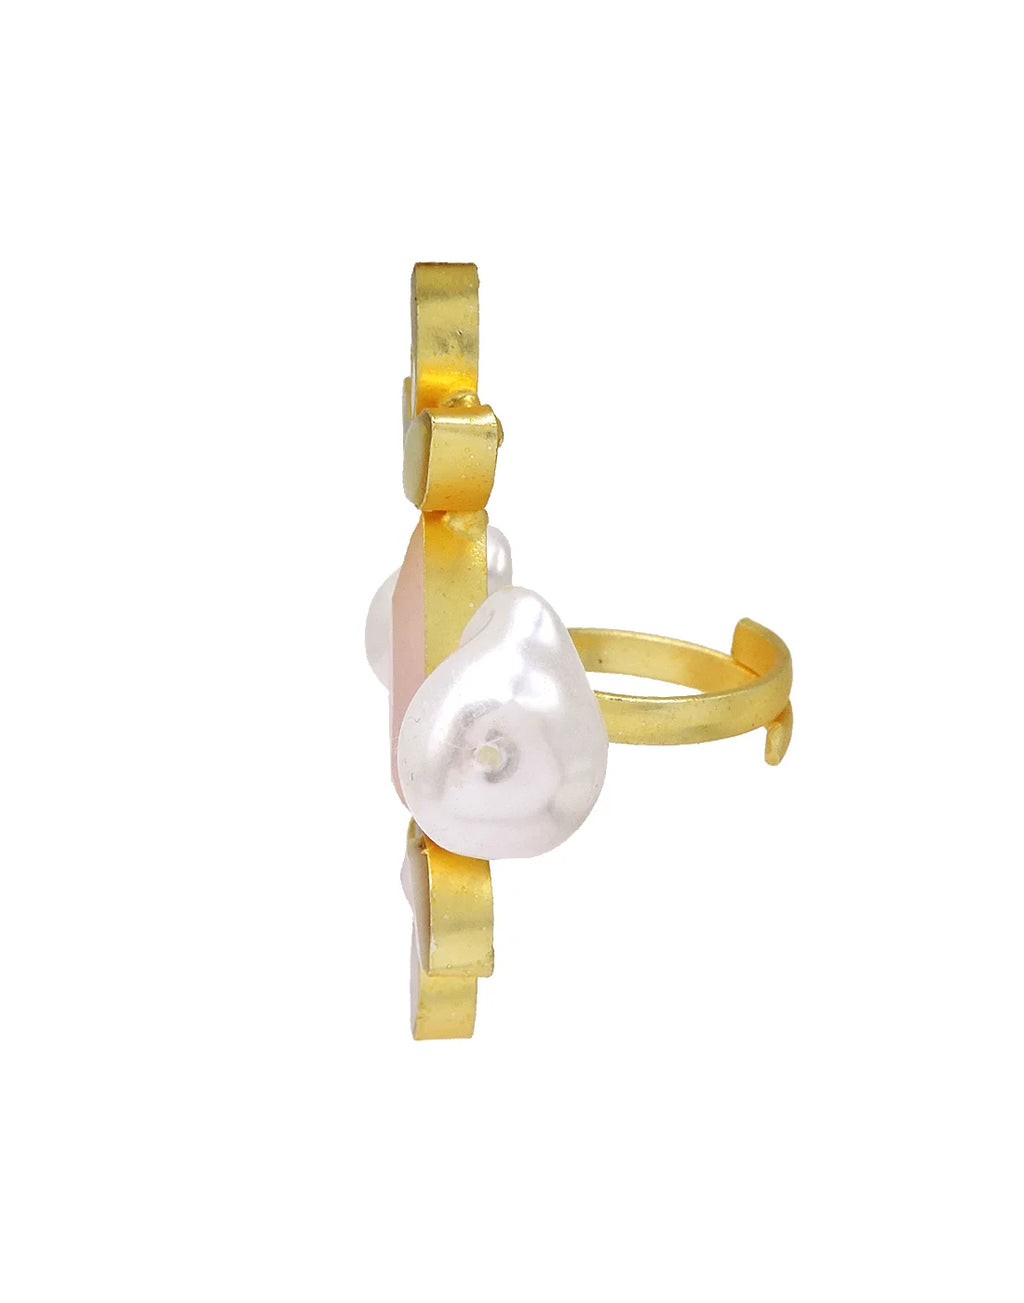 Glass & Pearl Ring- Handcrafted Jewellery from Dori